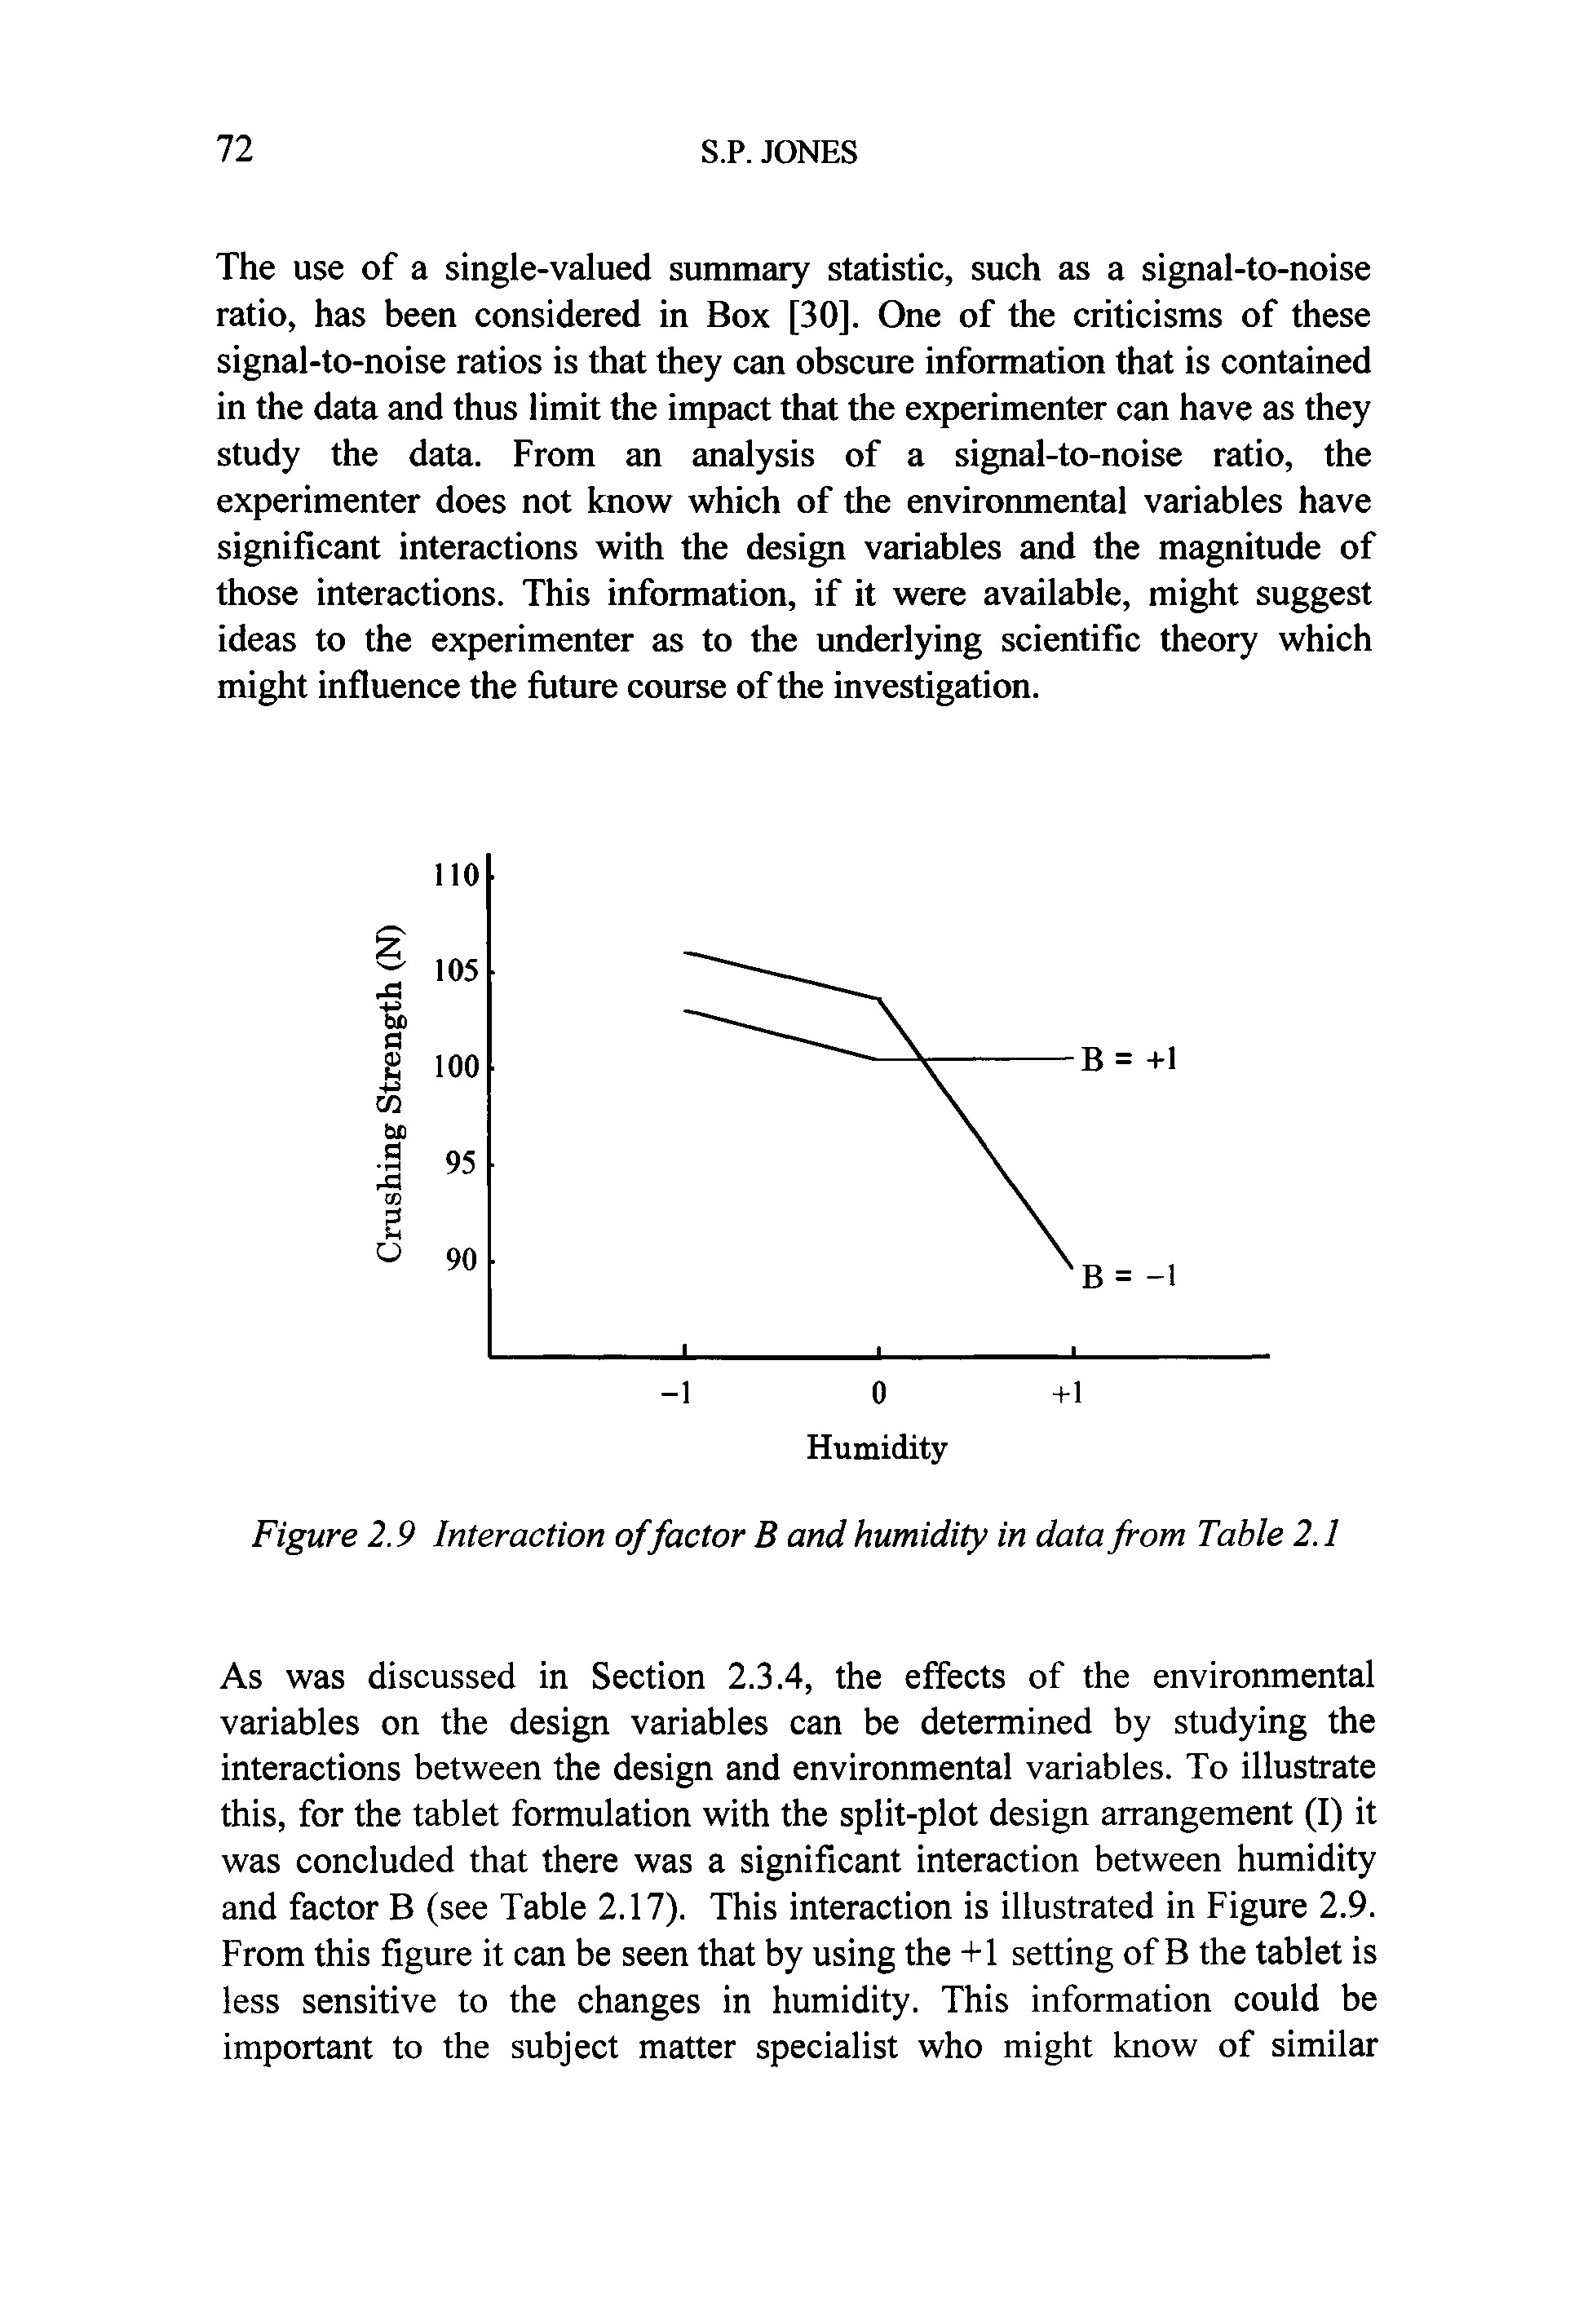 Figure 2.9 Interaction of factor B and humidity in data from Table 2.1...